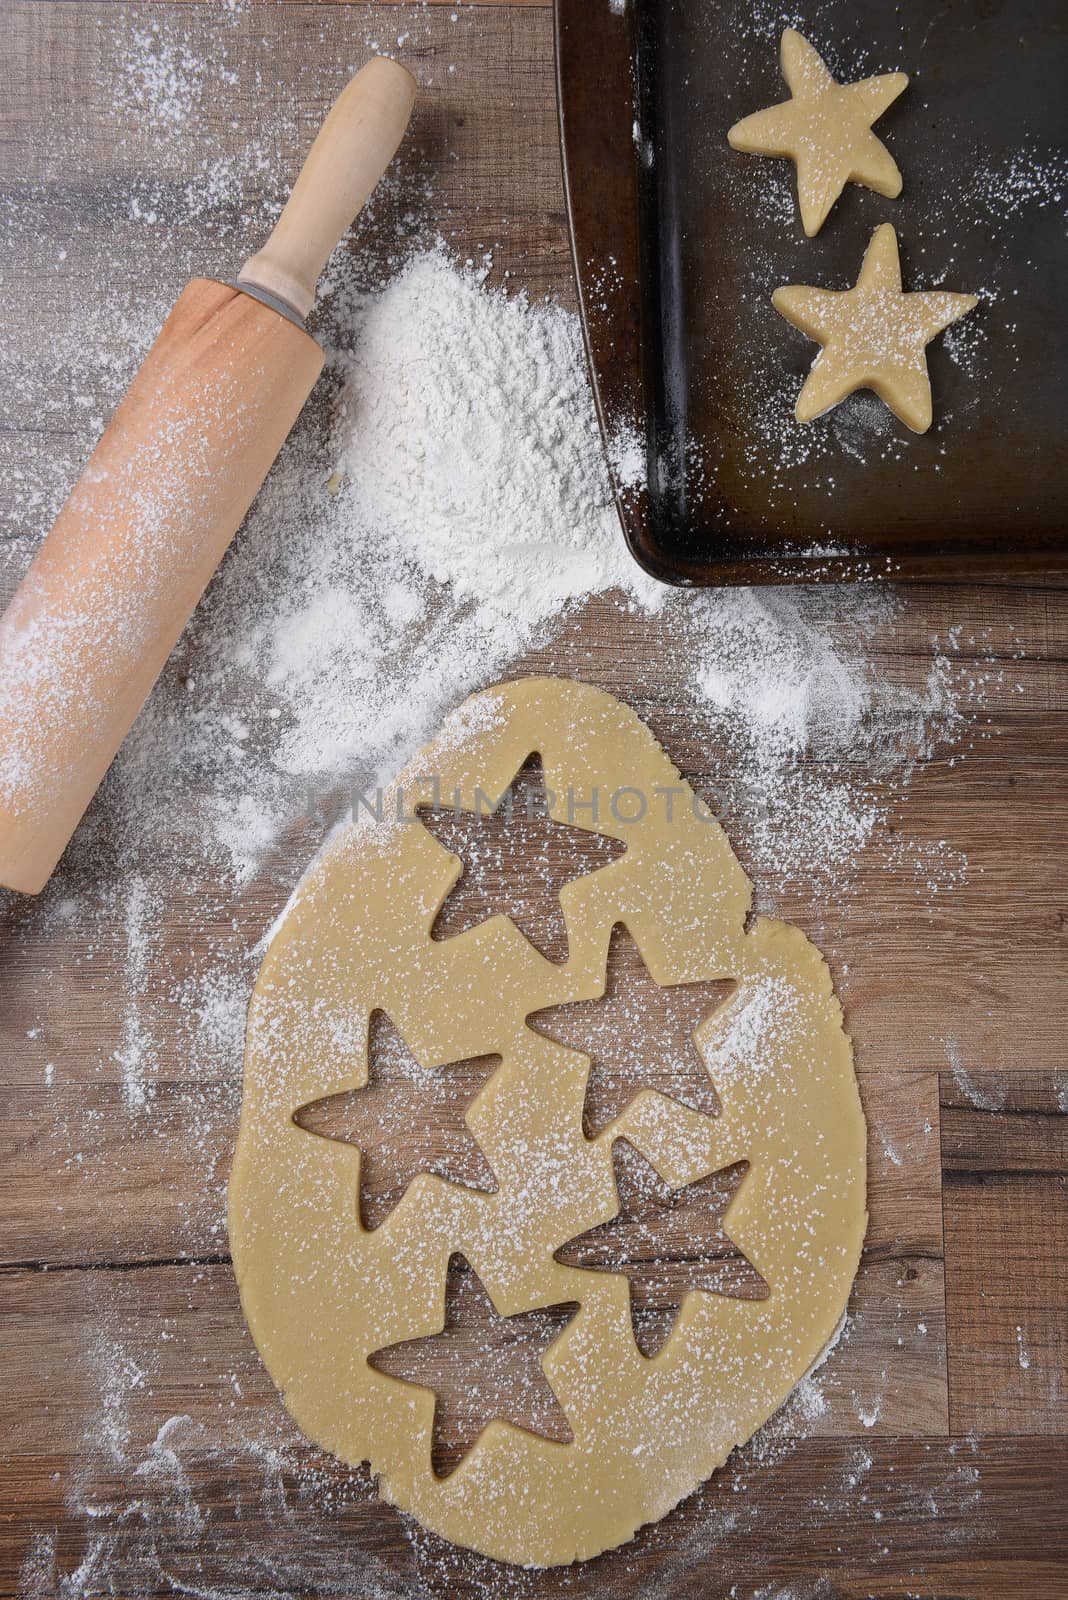 Top view of raw cookie dough with star shapes and cookie cutter on wood table with a rolling pin and flour sprinkles and baking sheet.